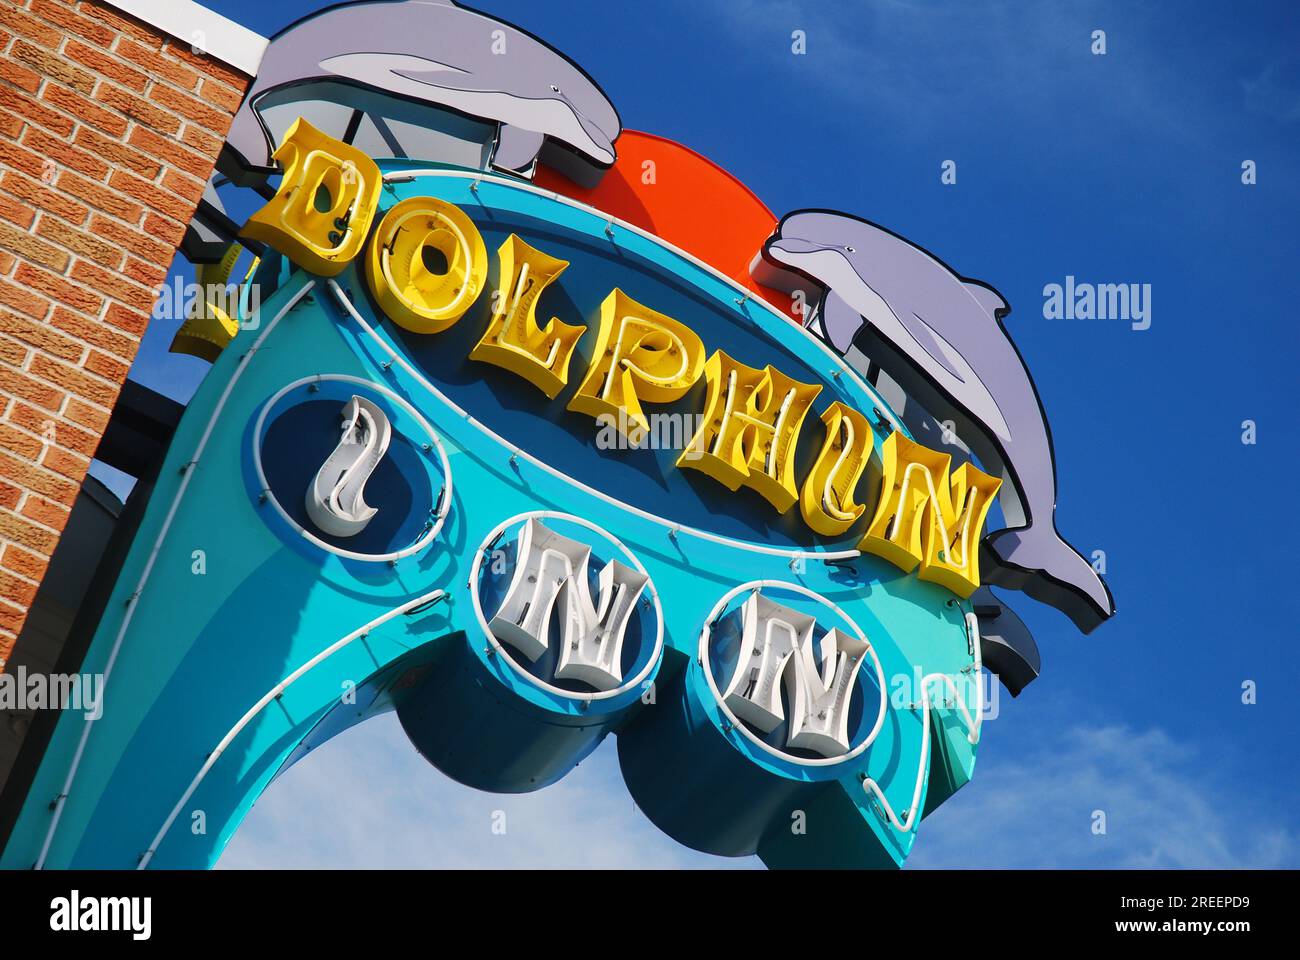 A large sign of the Dolphin Inn in Wildwood, New Jersey showcases the whimsy and fun feeling of a 1950s style doo wop architecture of the motels Stock Photo